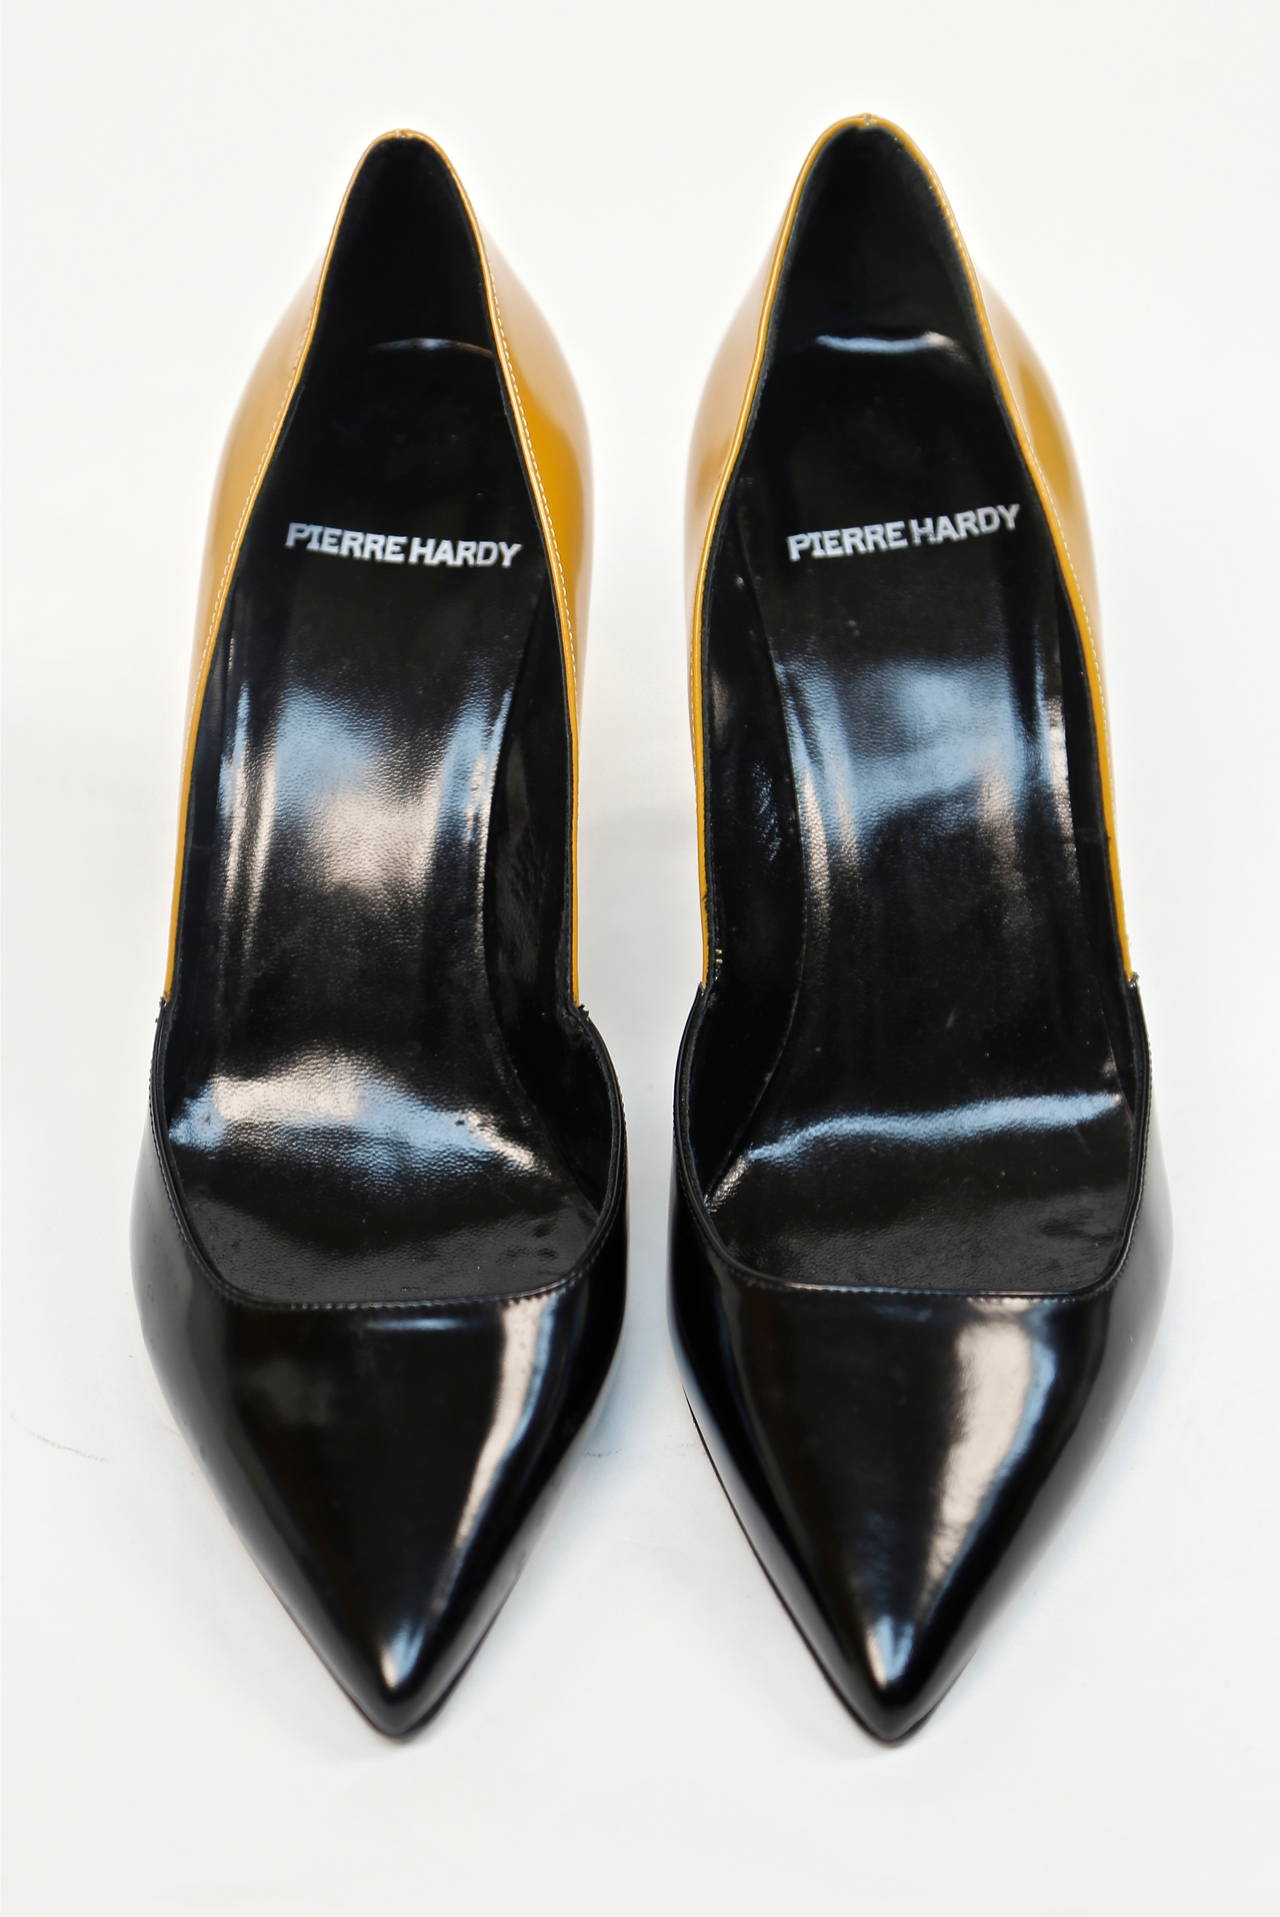 Striking pair of mustard yellow and black polished leather heels designed by Pierre Hardy. French size 38 which fits a US 7 or 7.5. Heels measure approximately 3.5